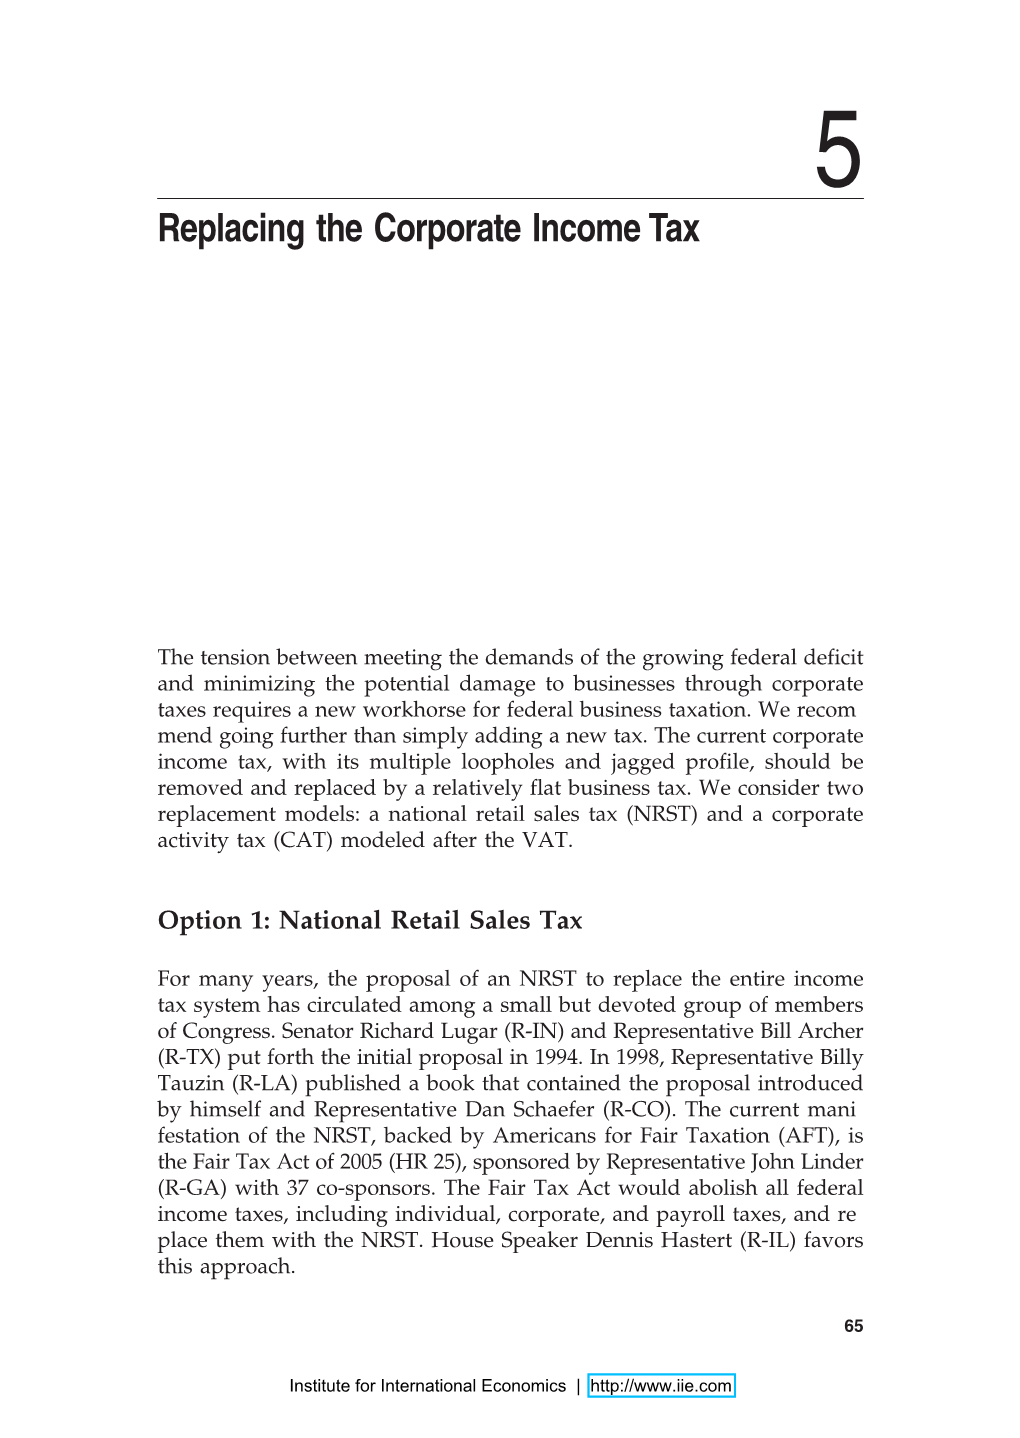 Replacing the Corporate Income Tax